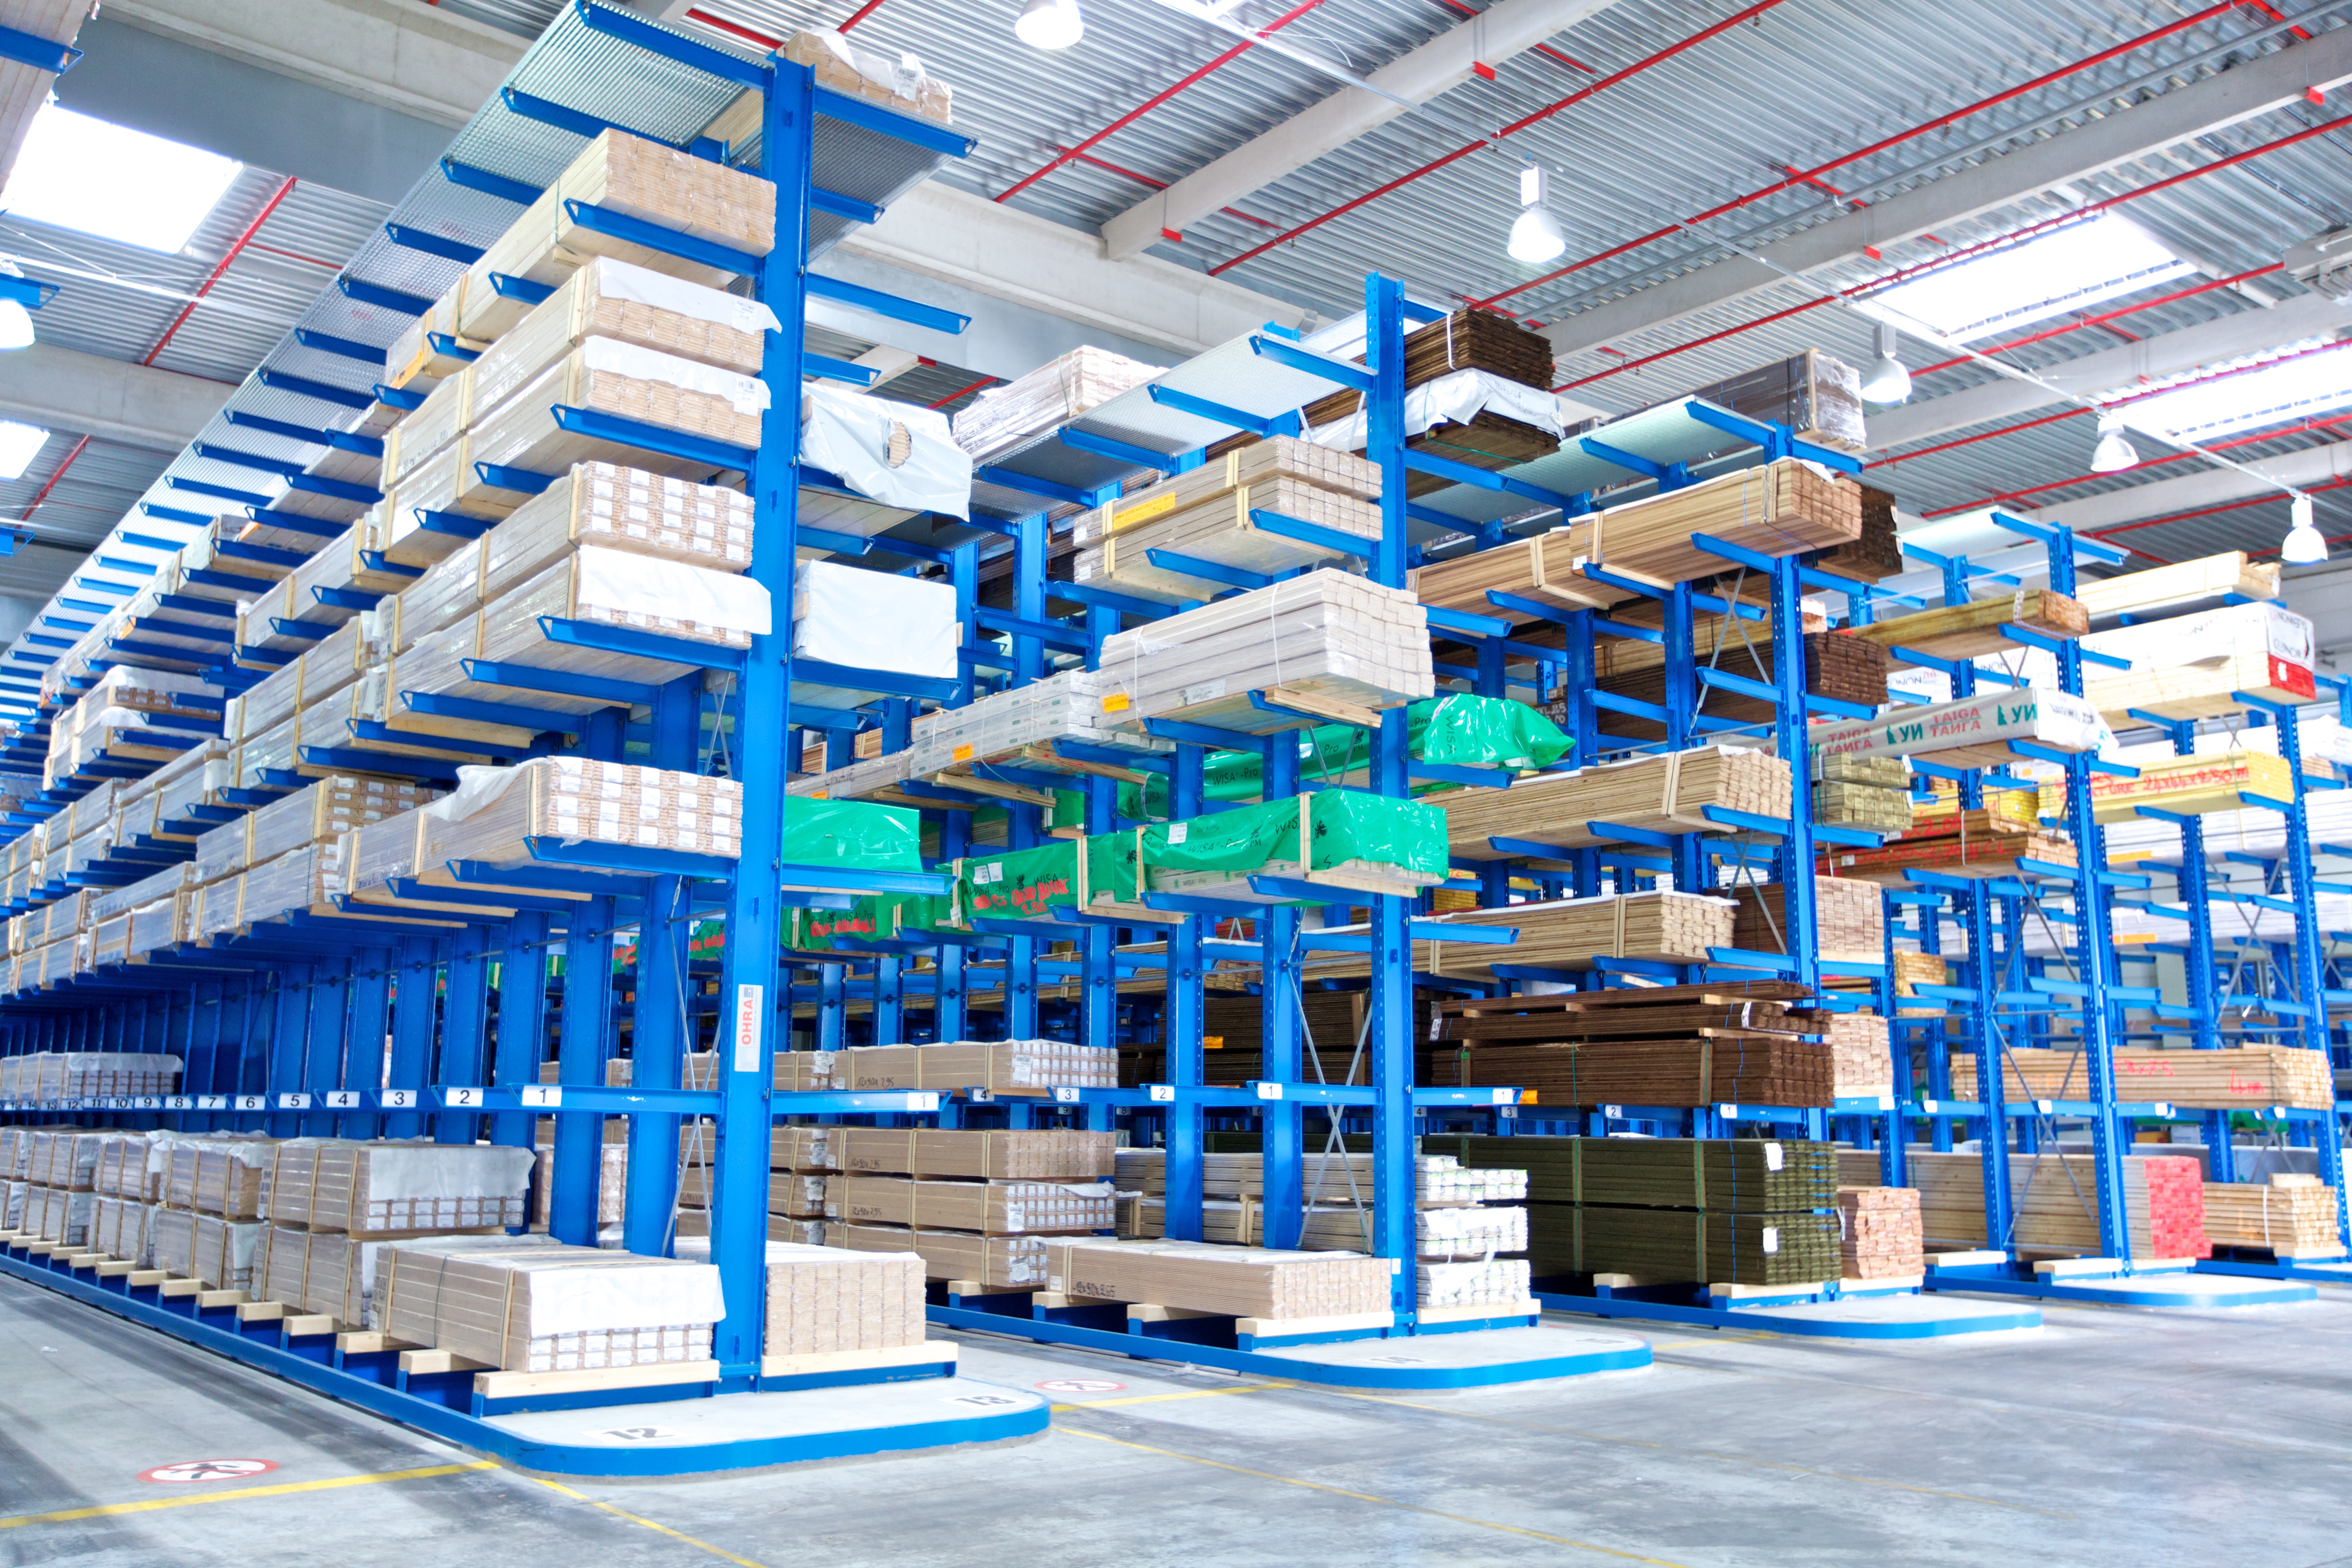 [Translate "Spain"] Cantilever racking building material